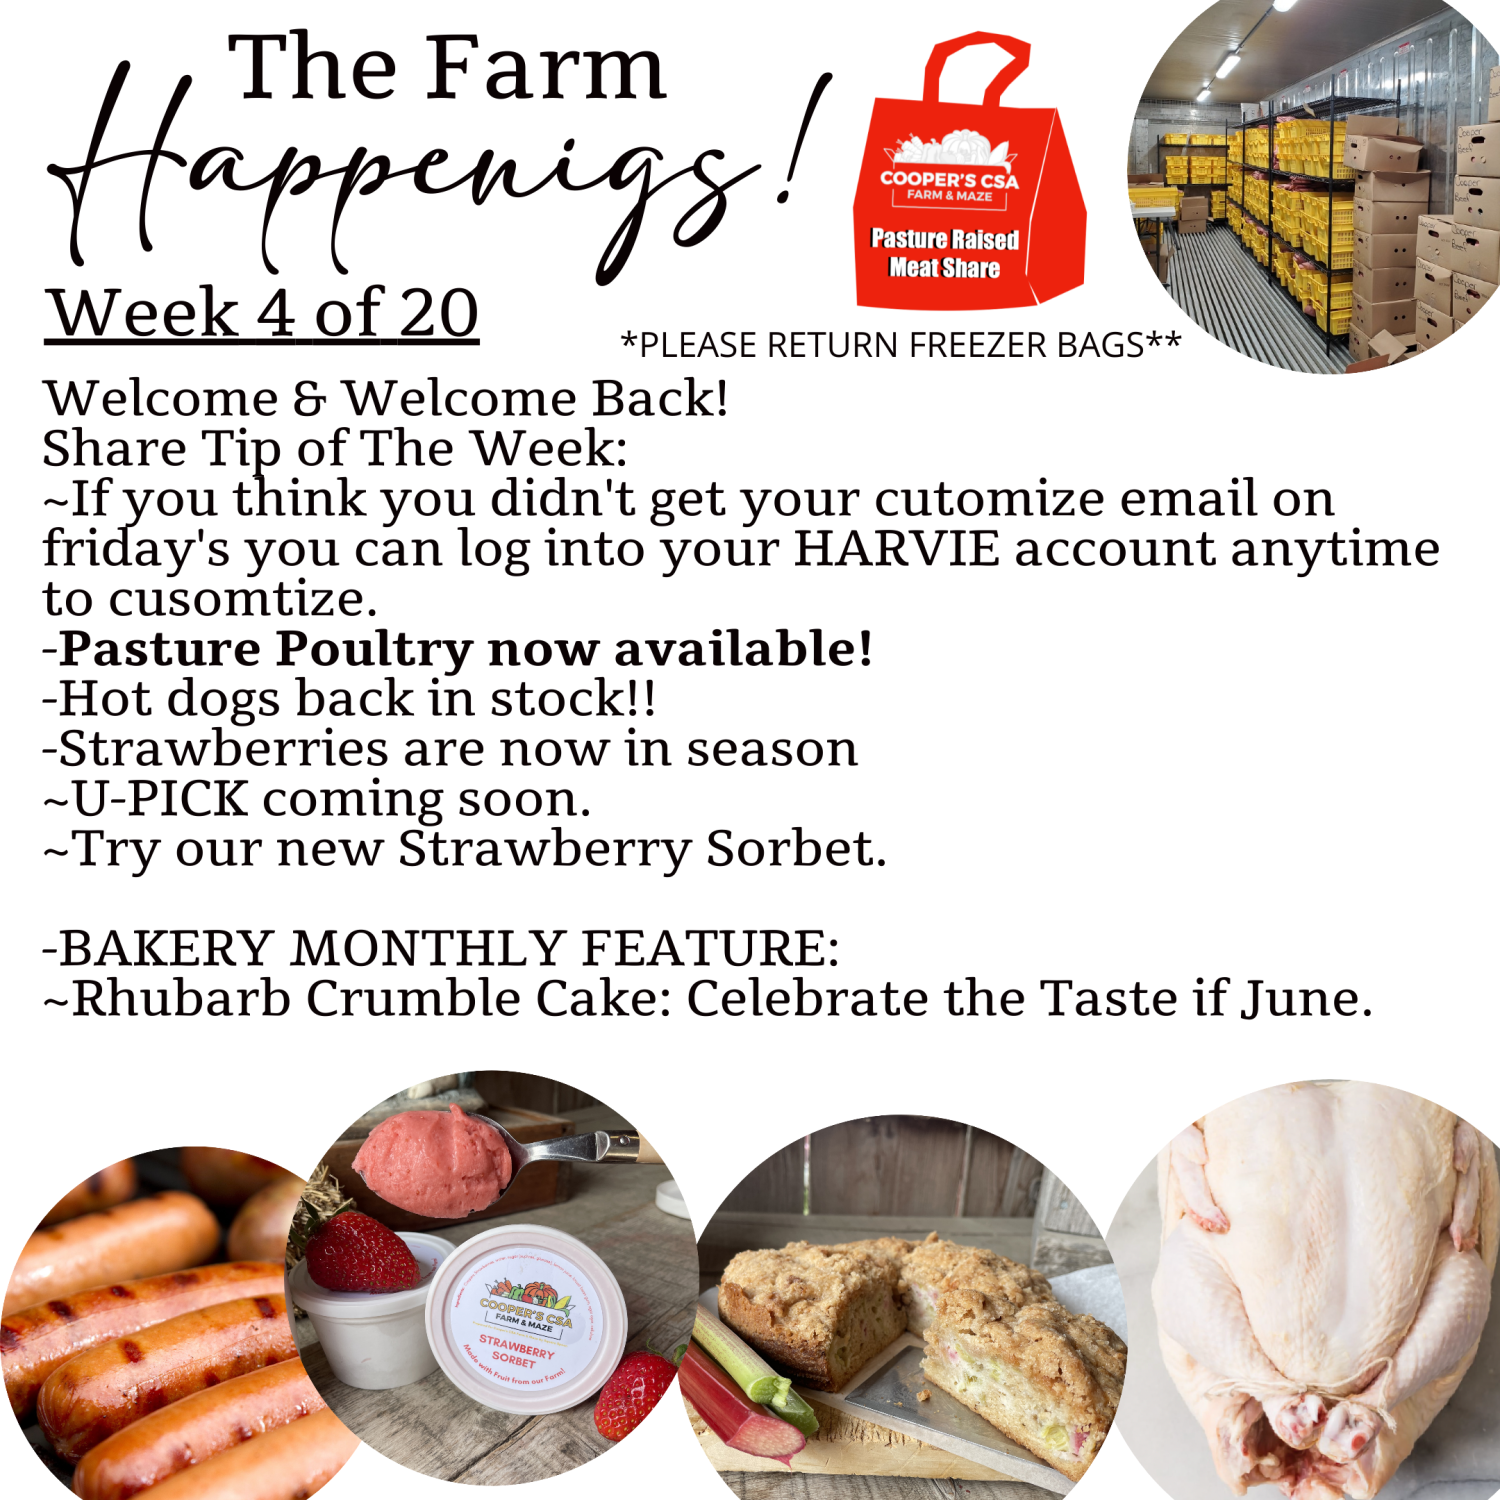 Next Happening: "Pasture Meat Shares"-Coopers CSA Farm Farm Happenings Week 4 of 20